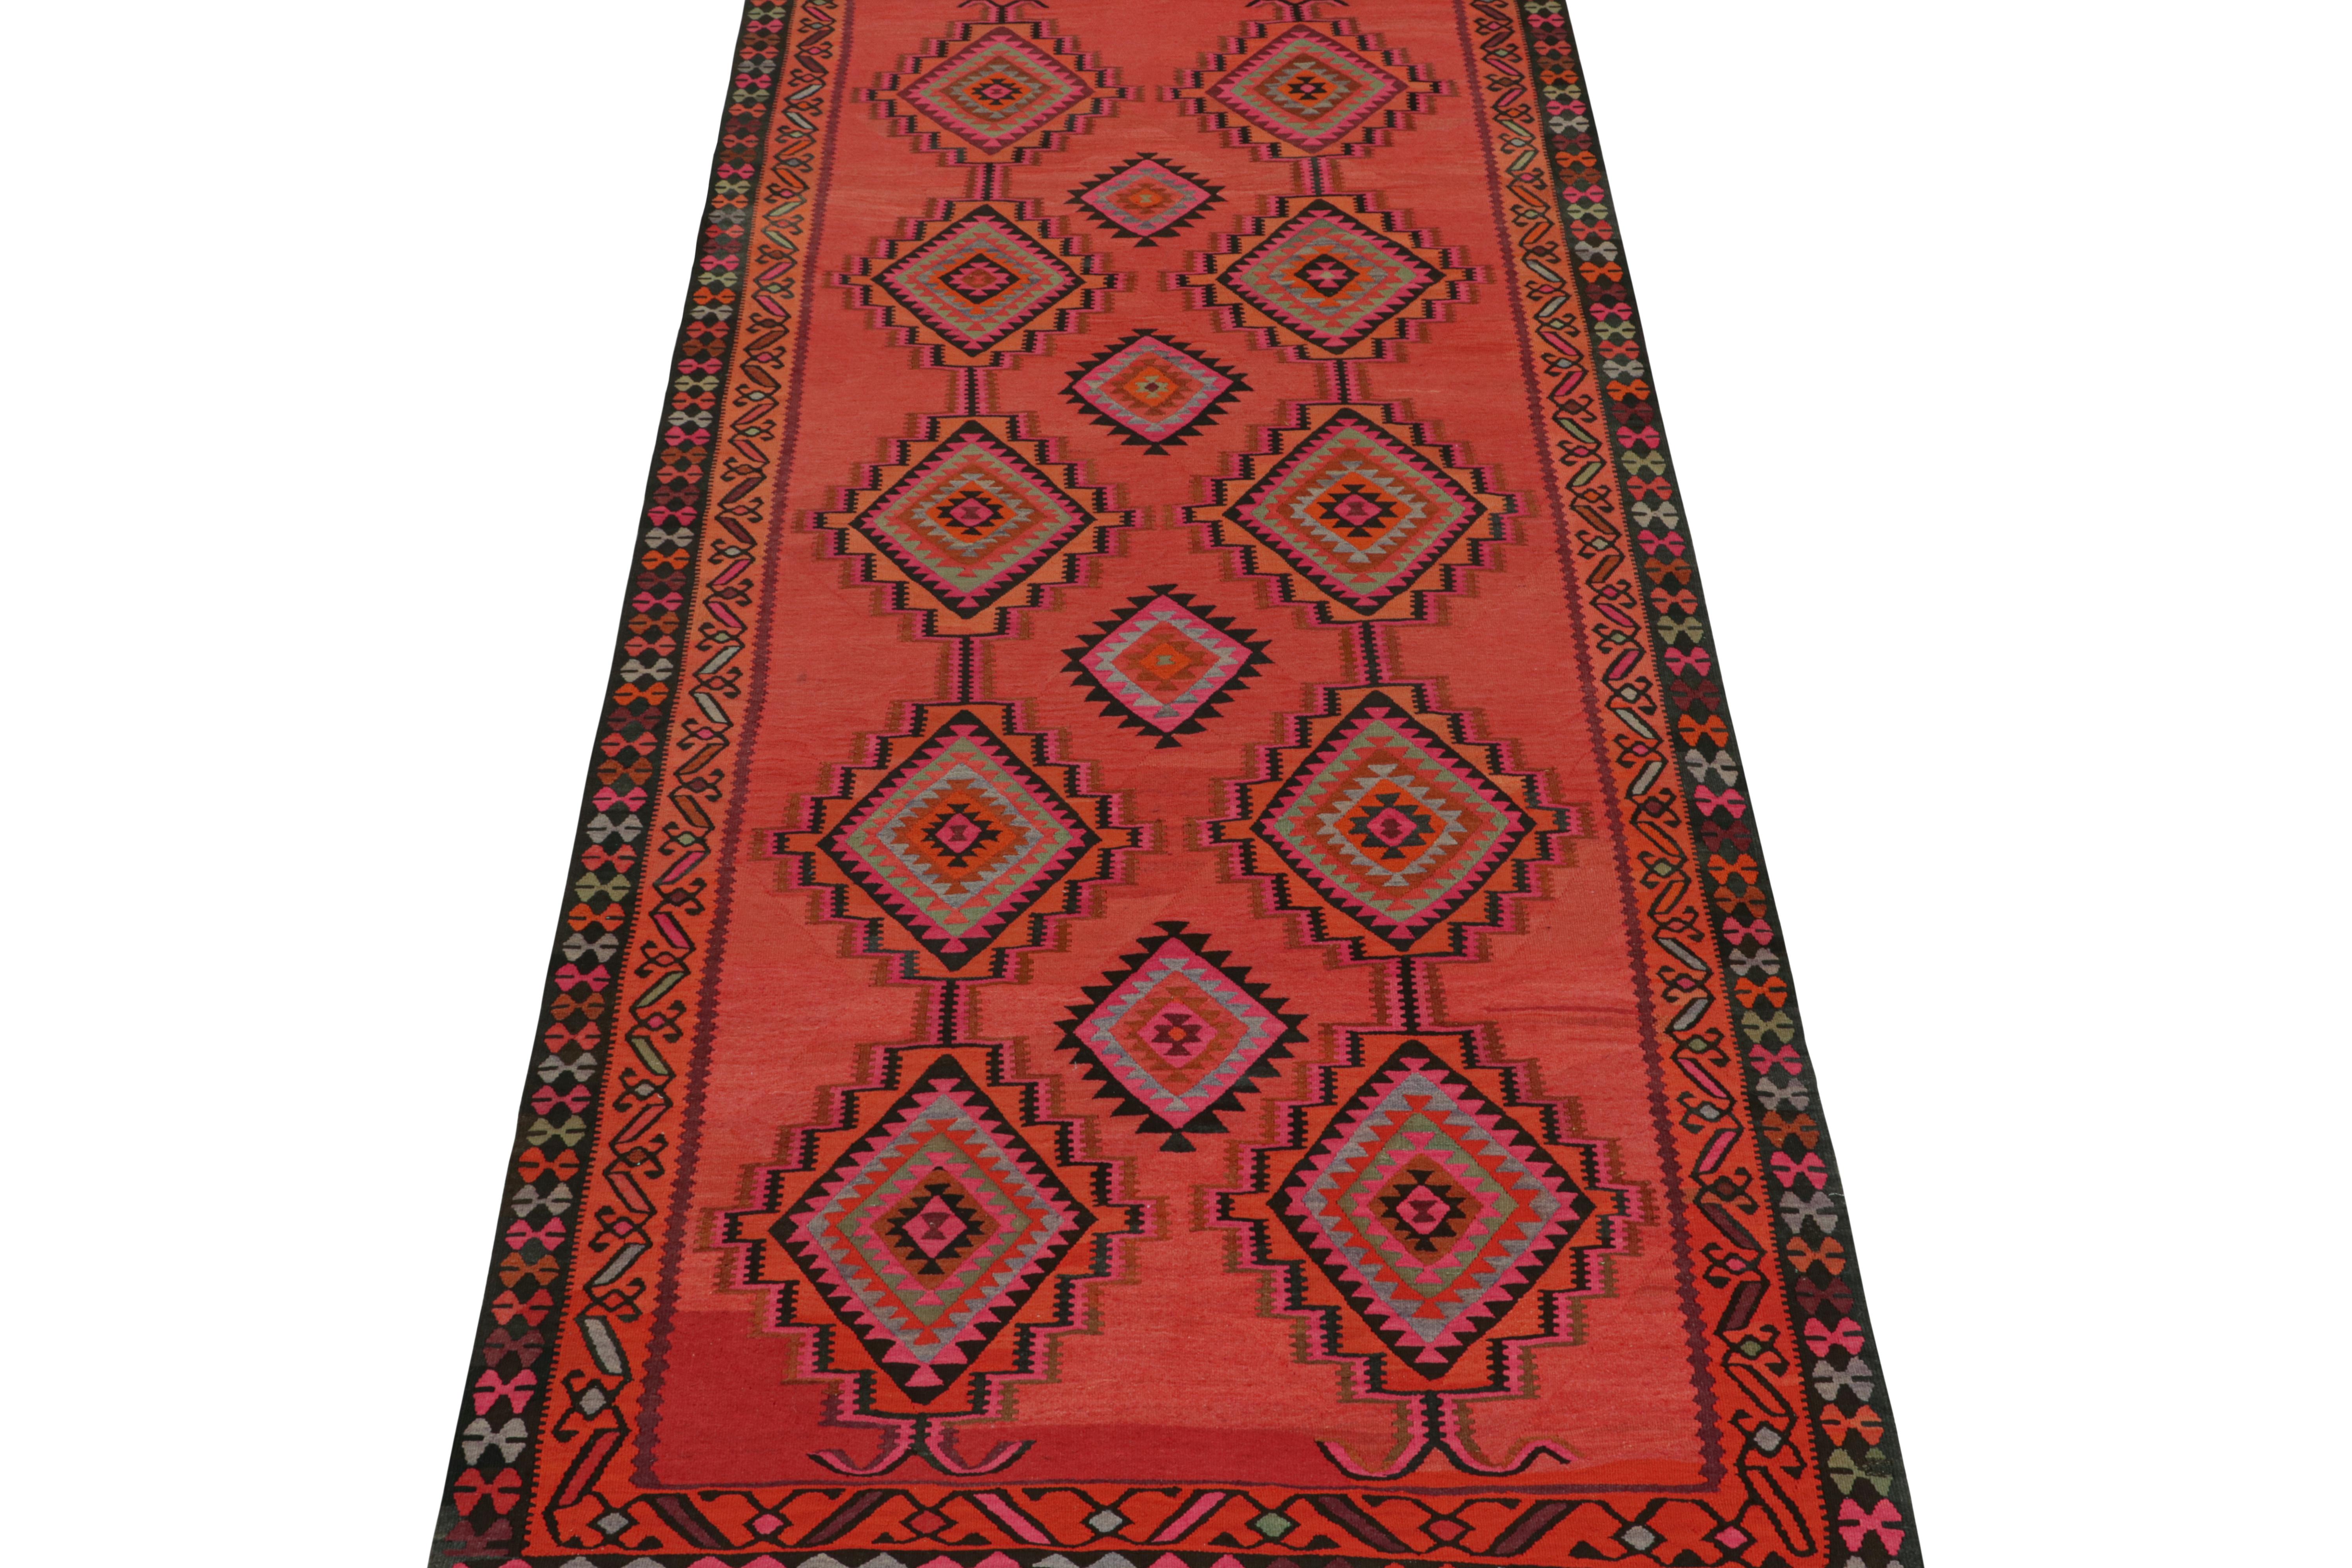 This vintage 6x13 Persian Kilim is a tribal rug from Meshkin—a small northwestern village known for its fabulous works. Handwoven in wool, it originates circa 1950-1960.

Further on the Design:

The bold design prefers a bright red field and black